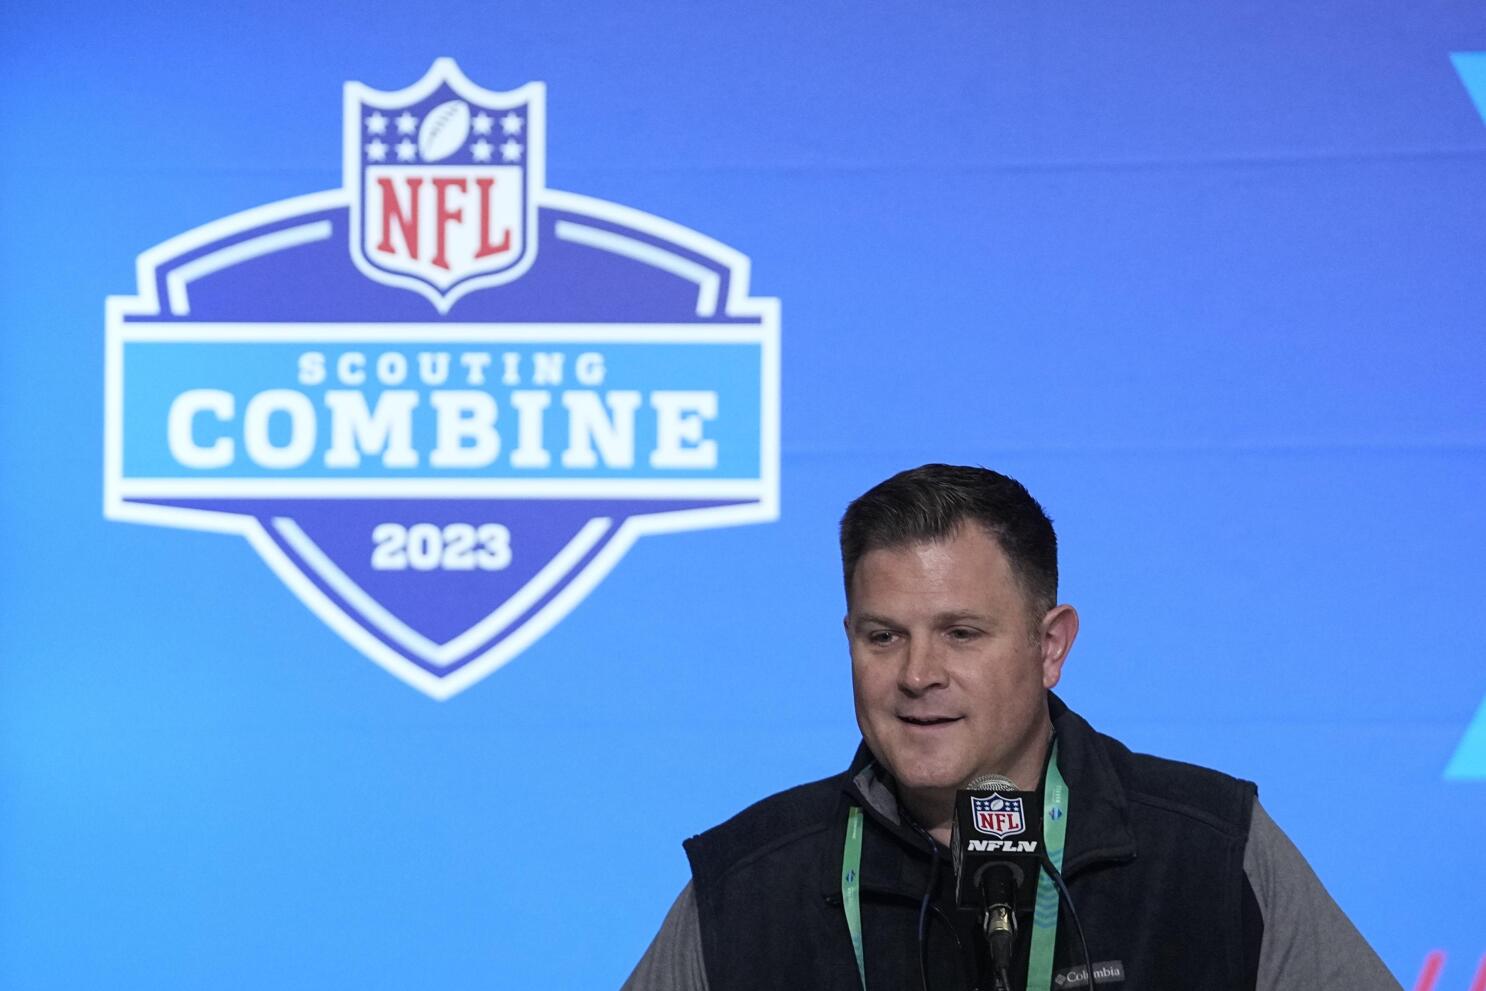 Rodgers, QBs become top attractions at NFL combine